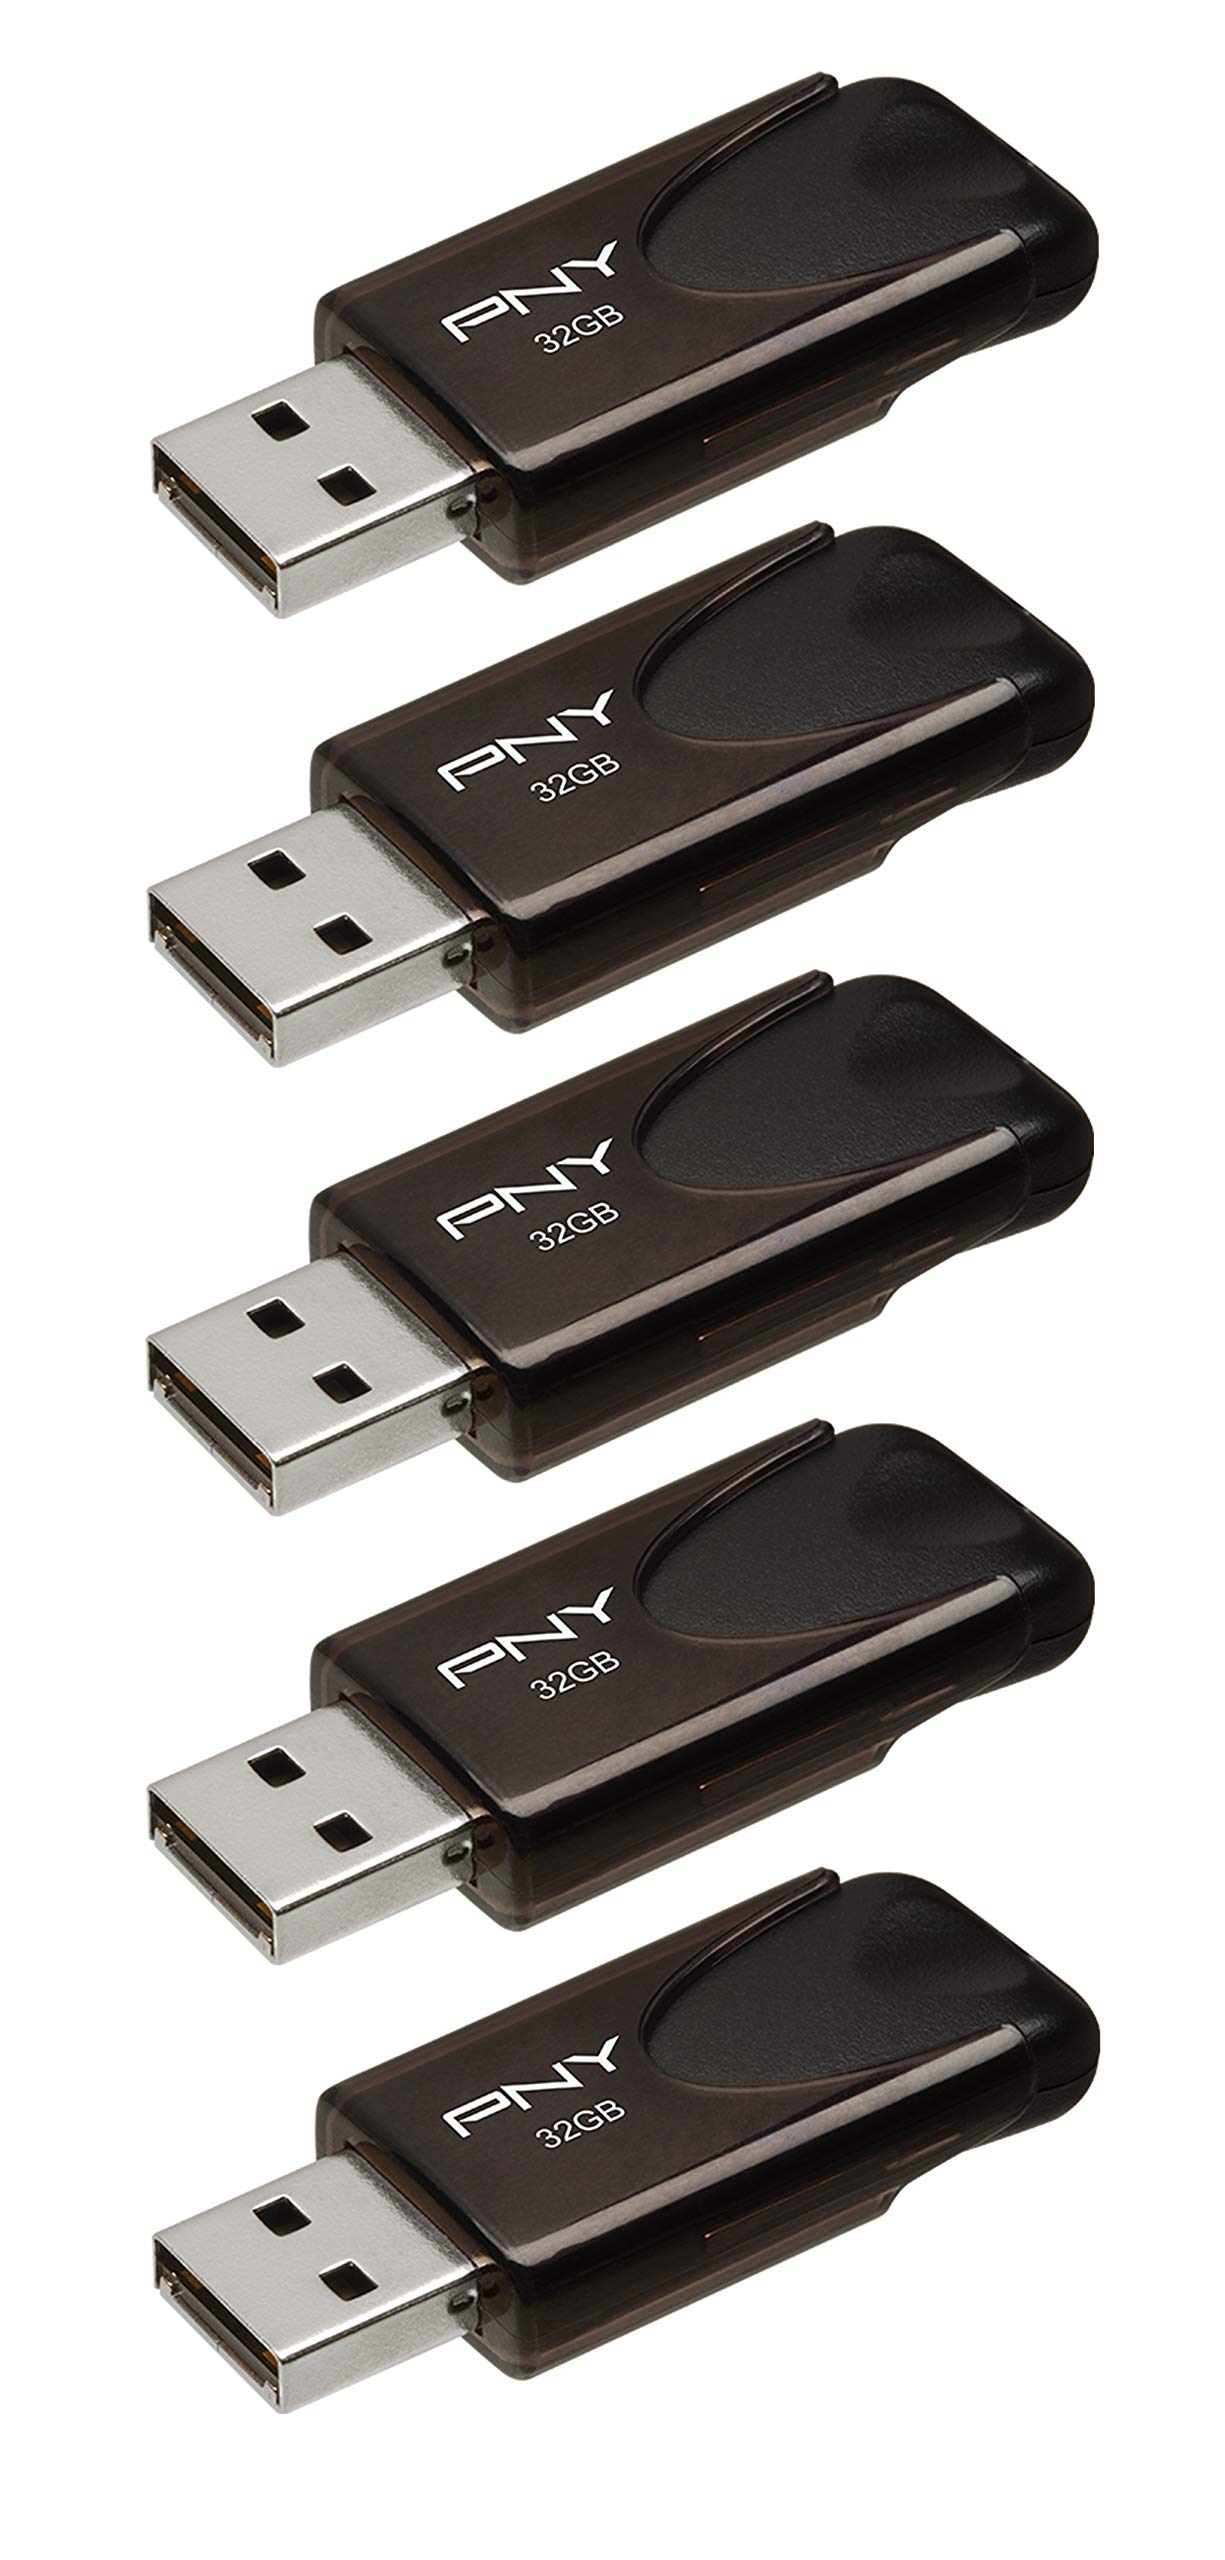 PNY Attaché 4 32GB USB 2.0 Flash Drive 5-Pack for $7.97 - YMMV Amazon Business Accounts Only